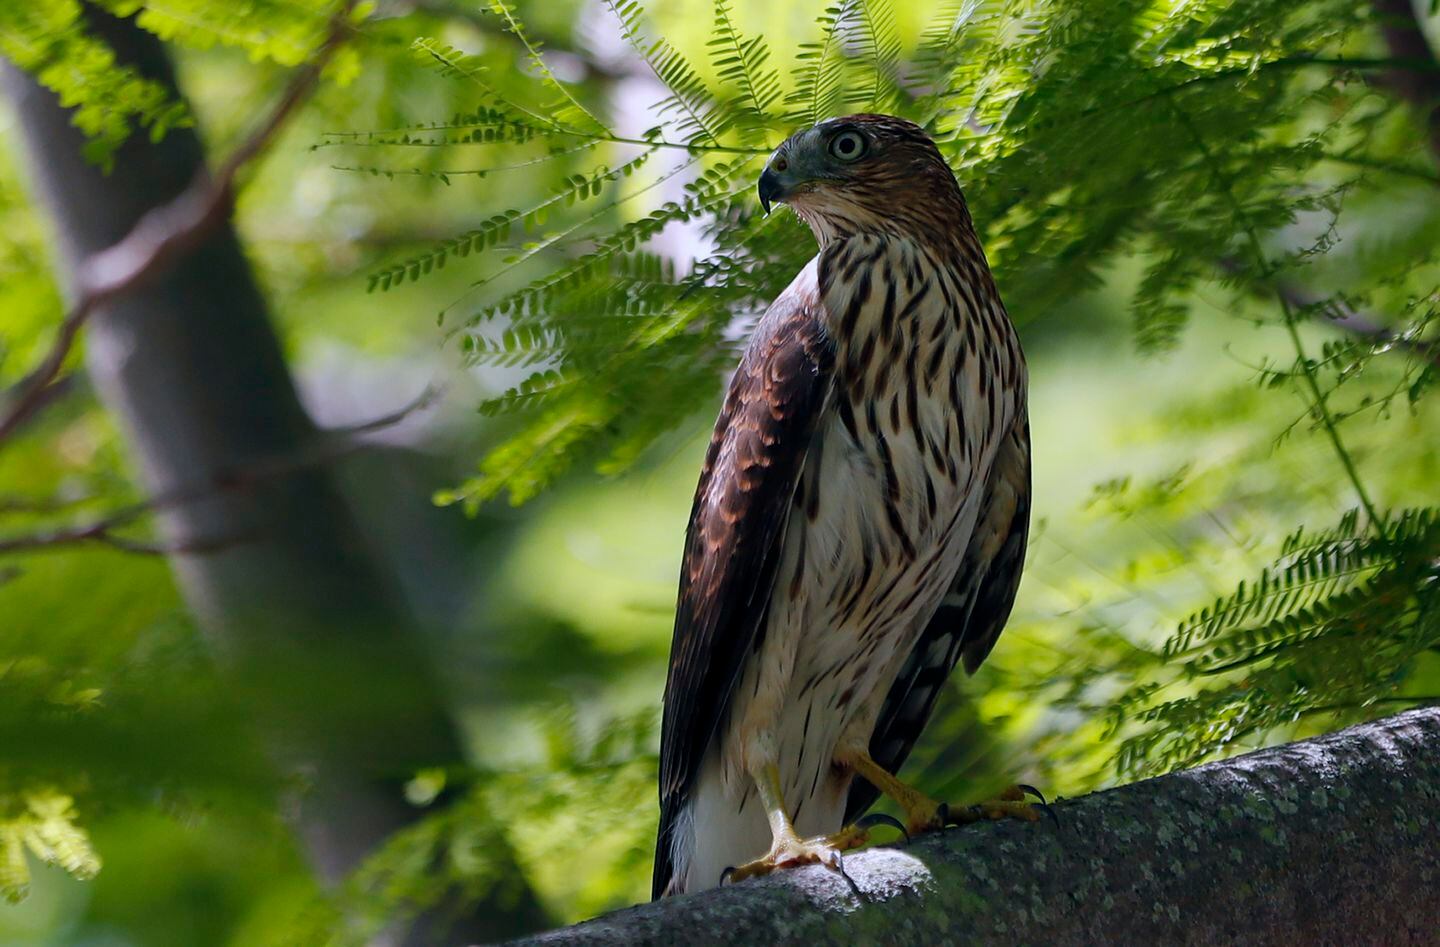 The Massachusetts Birds of Prey Rehab Facility: Offering a second